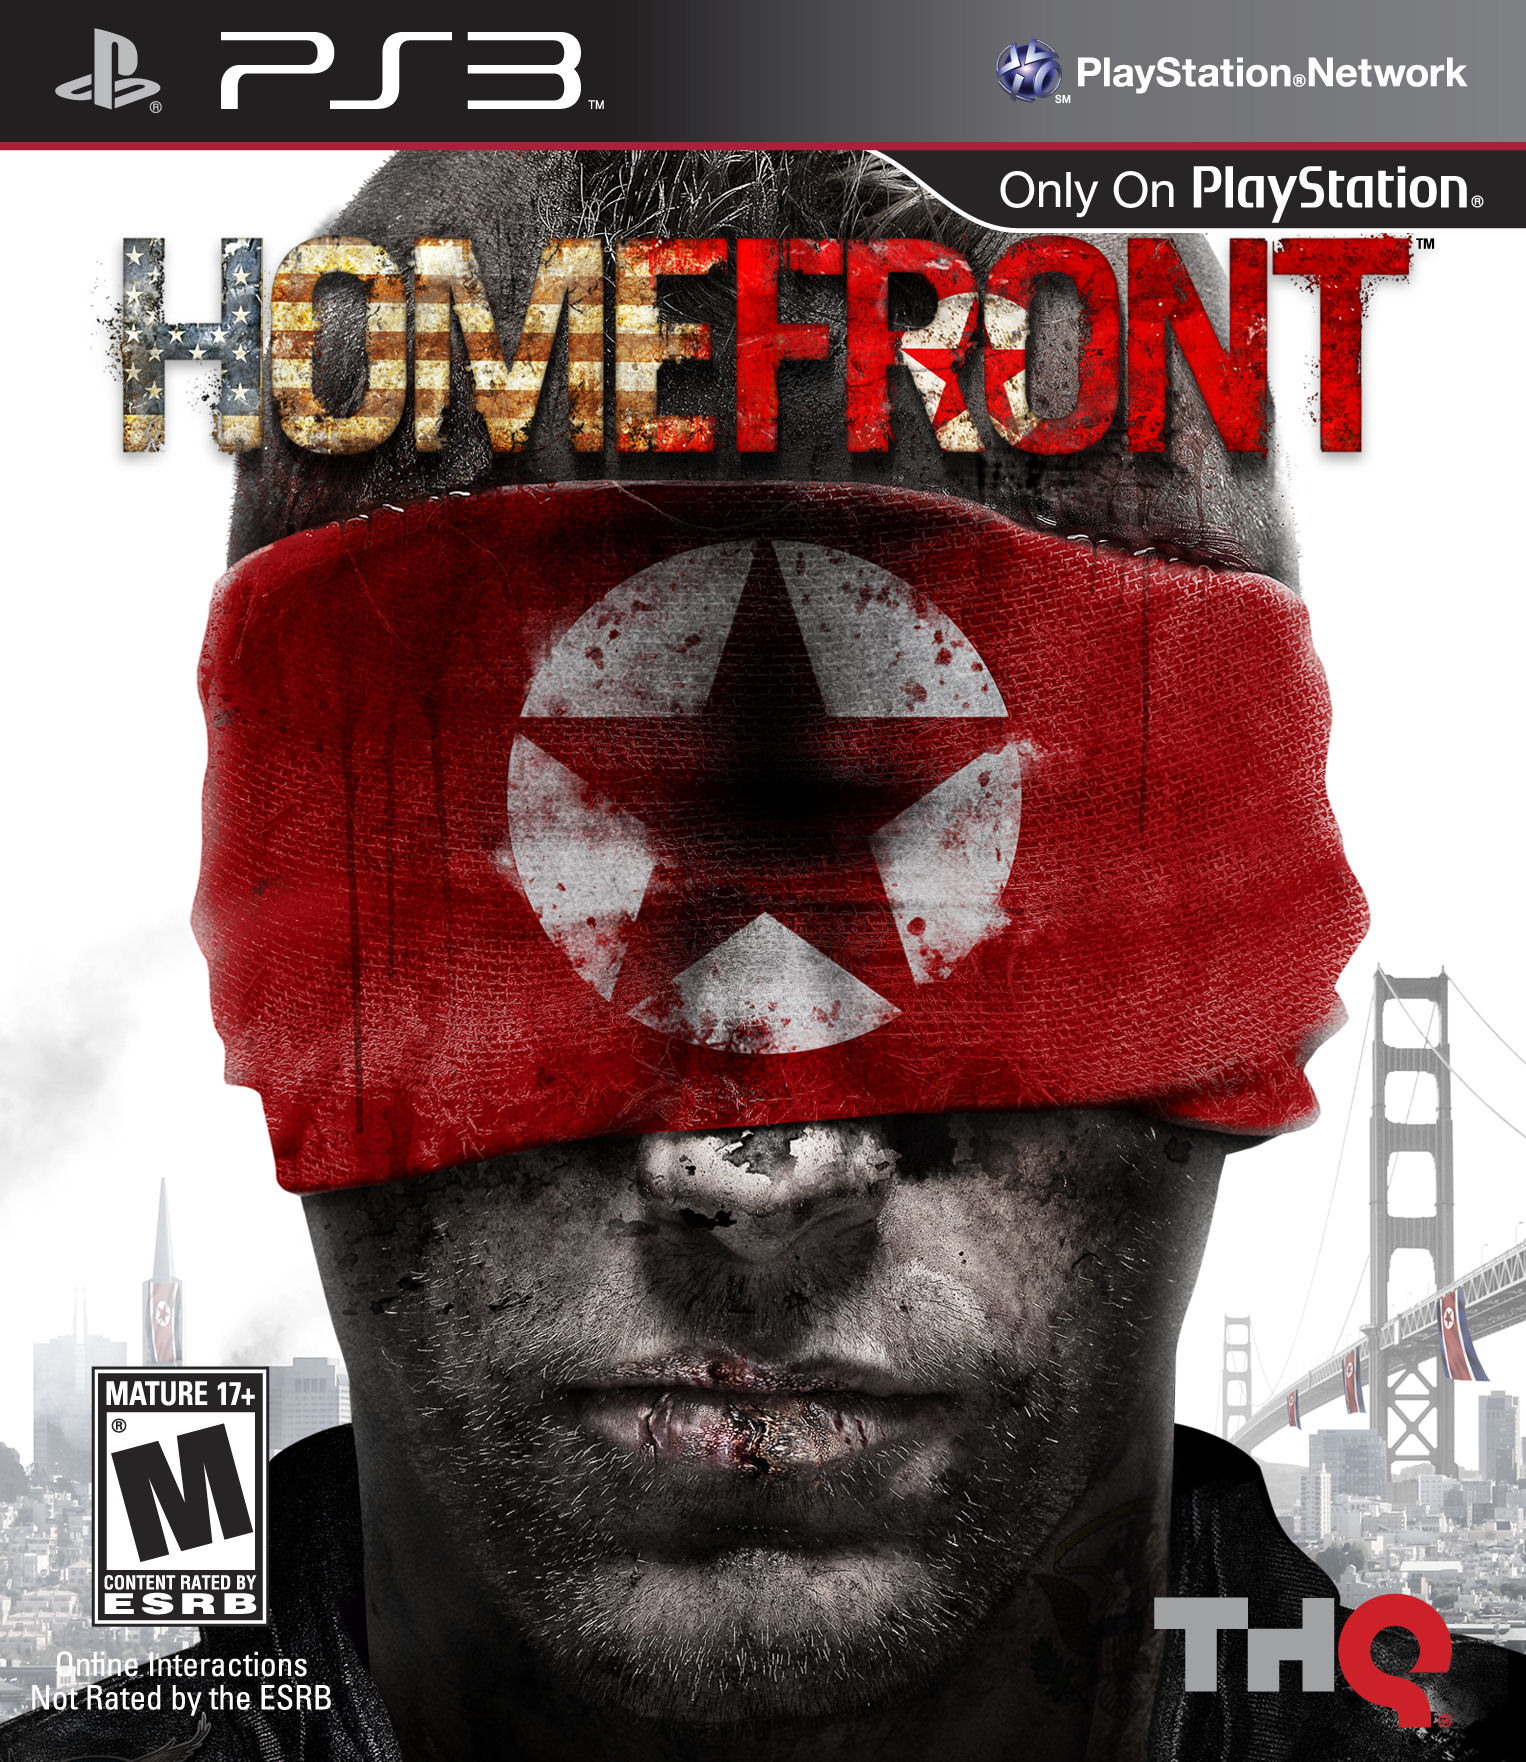 Media asset in full size related to 3dfxzone.it news item entitled as follows: THQ pubblica le art box del first-person shooter Homefront | Image Name: news14521_3.jpg